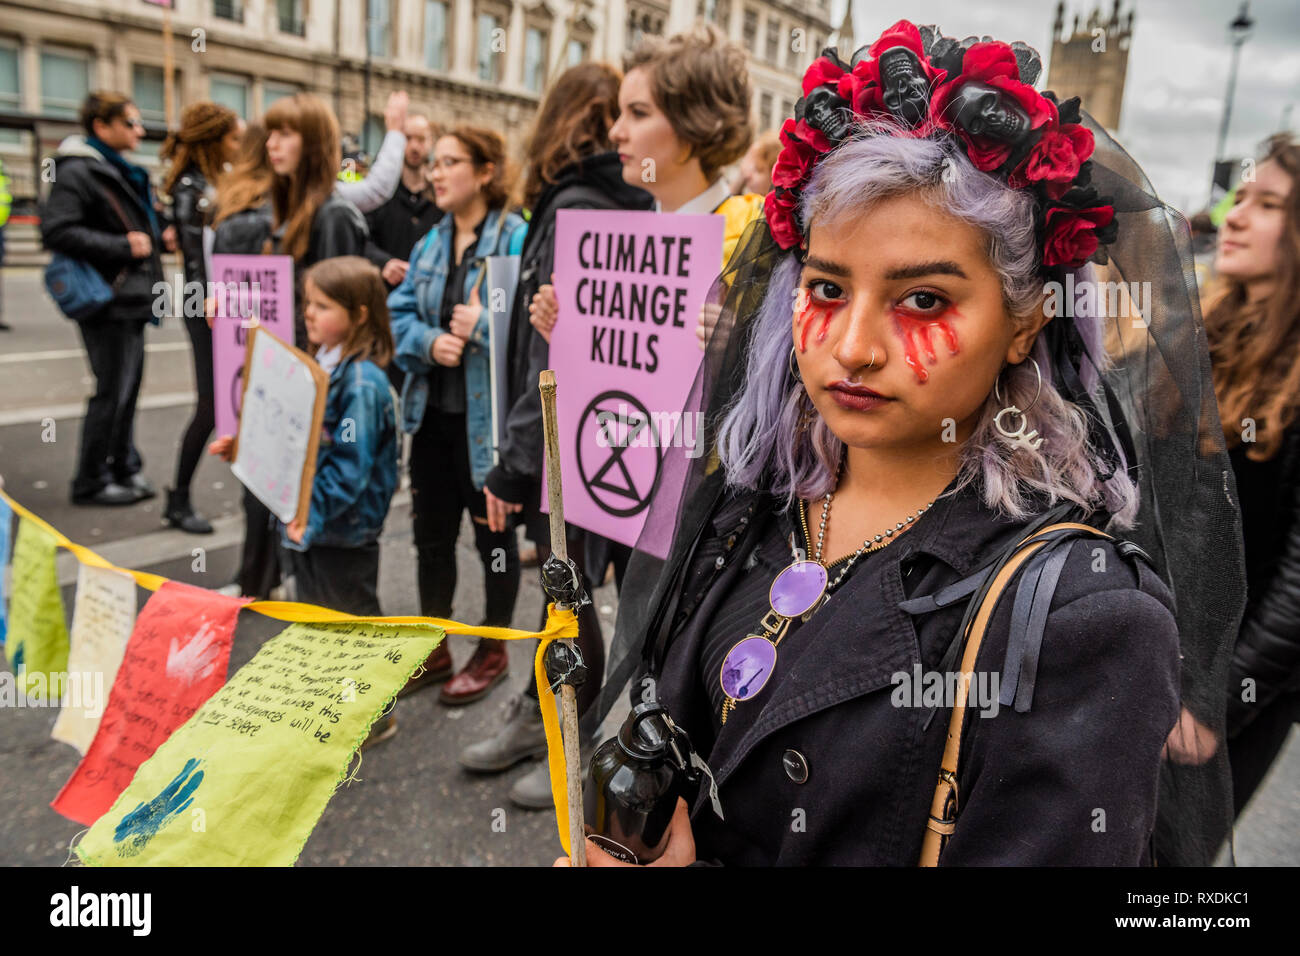 London, UK. 09th March, 2019. The theme was to wear funereal black - The Blood of our Children protest organised by Extinction Rebellion - An Act of Civil Disobedience to call for action against climate change. Activists pour (artificial) blood on the ground outside Downing Street. They were protesting on behalf of the next generation who will face a future defined by the climate and ecological breakdown. The believe they must 'rebel for life'. Credit: Guy Bell/Alamy Live News Stock Photo